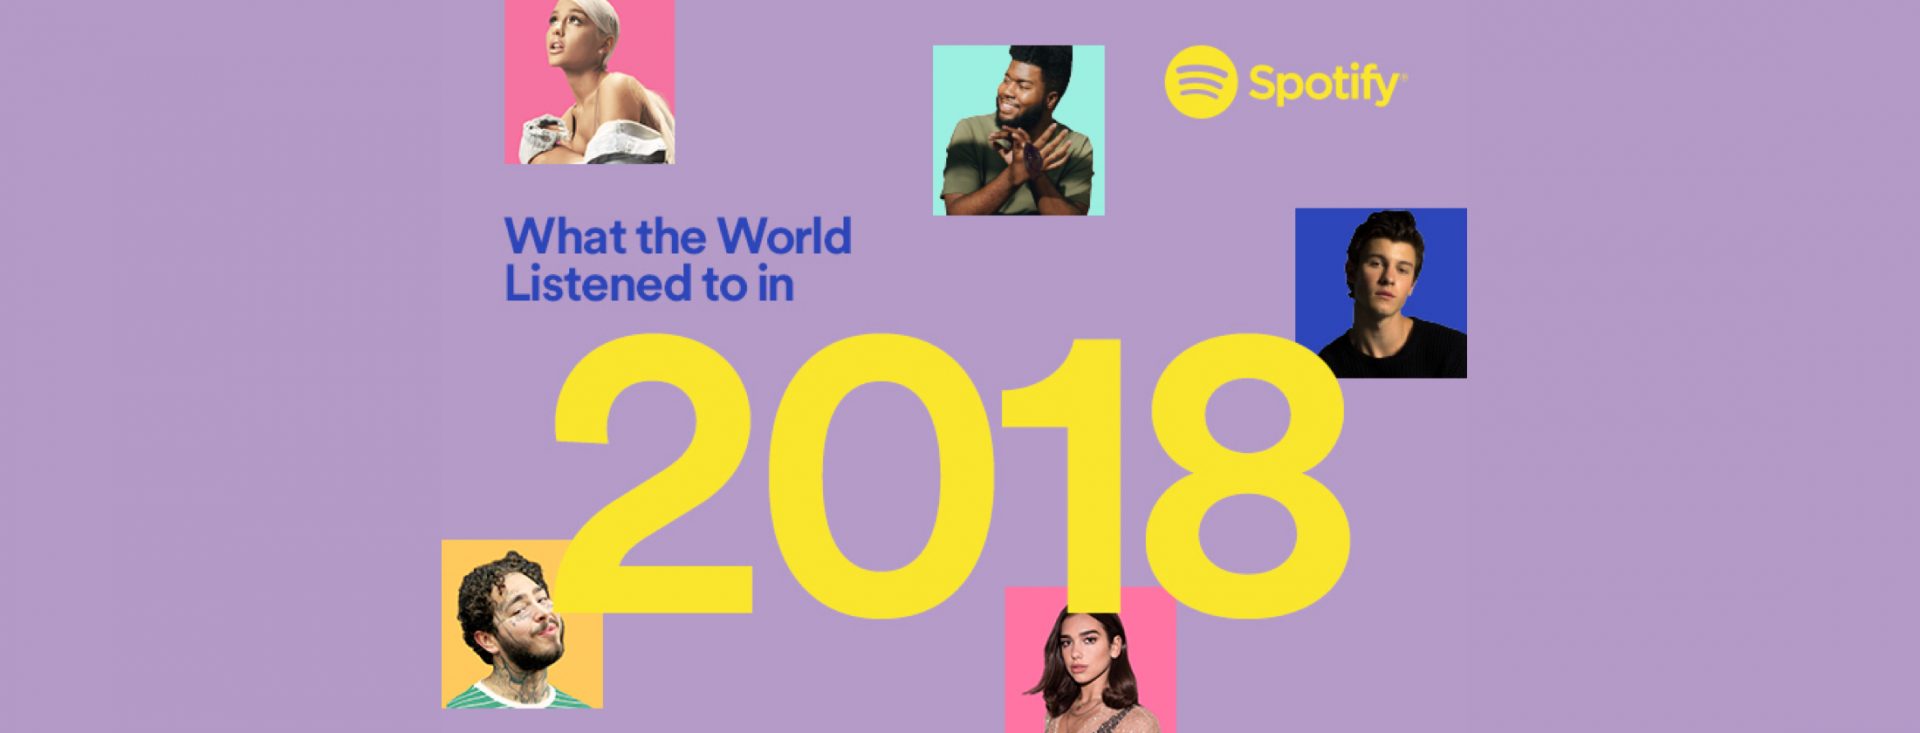 The Top Songs, Artists, and of Spotify